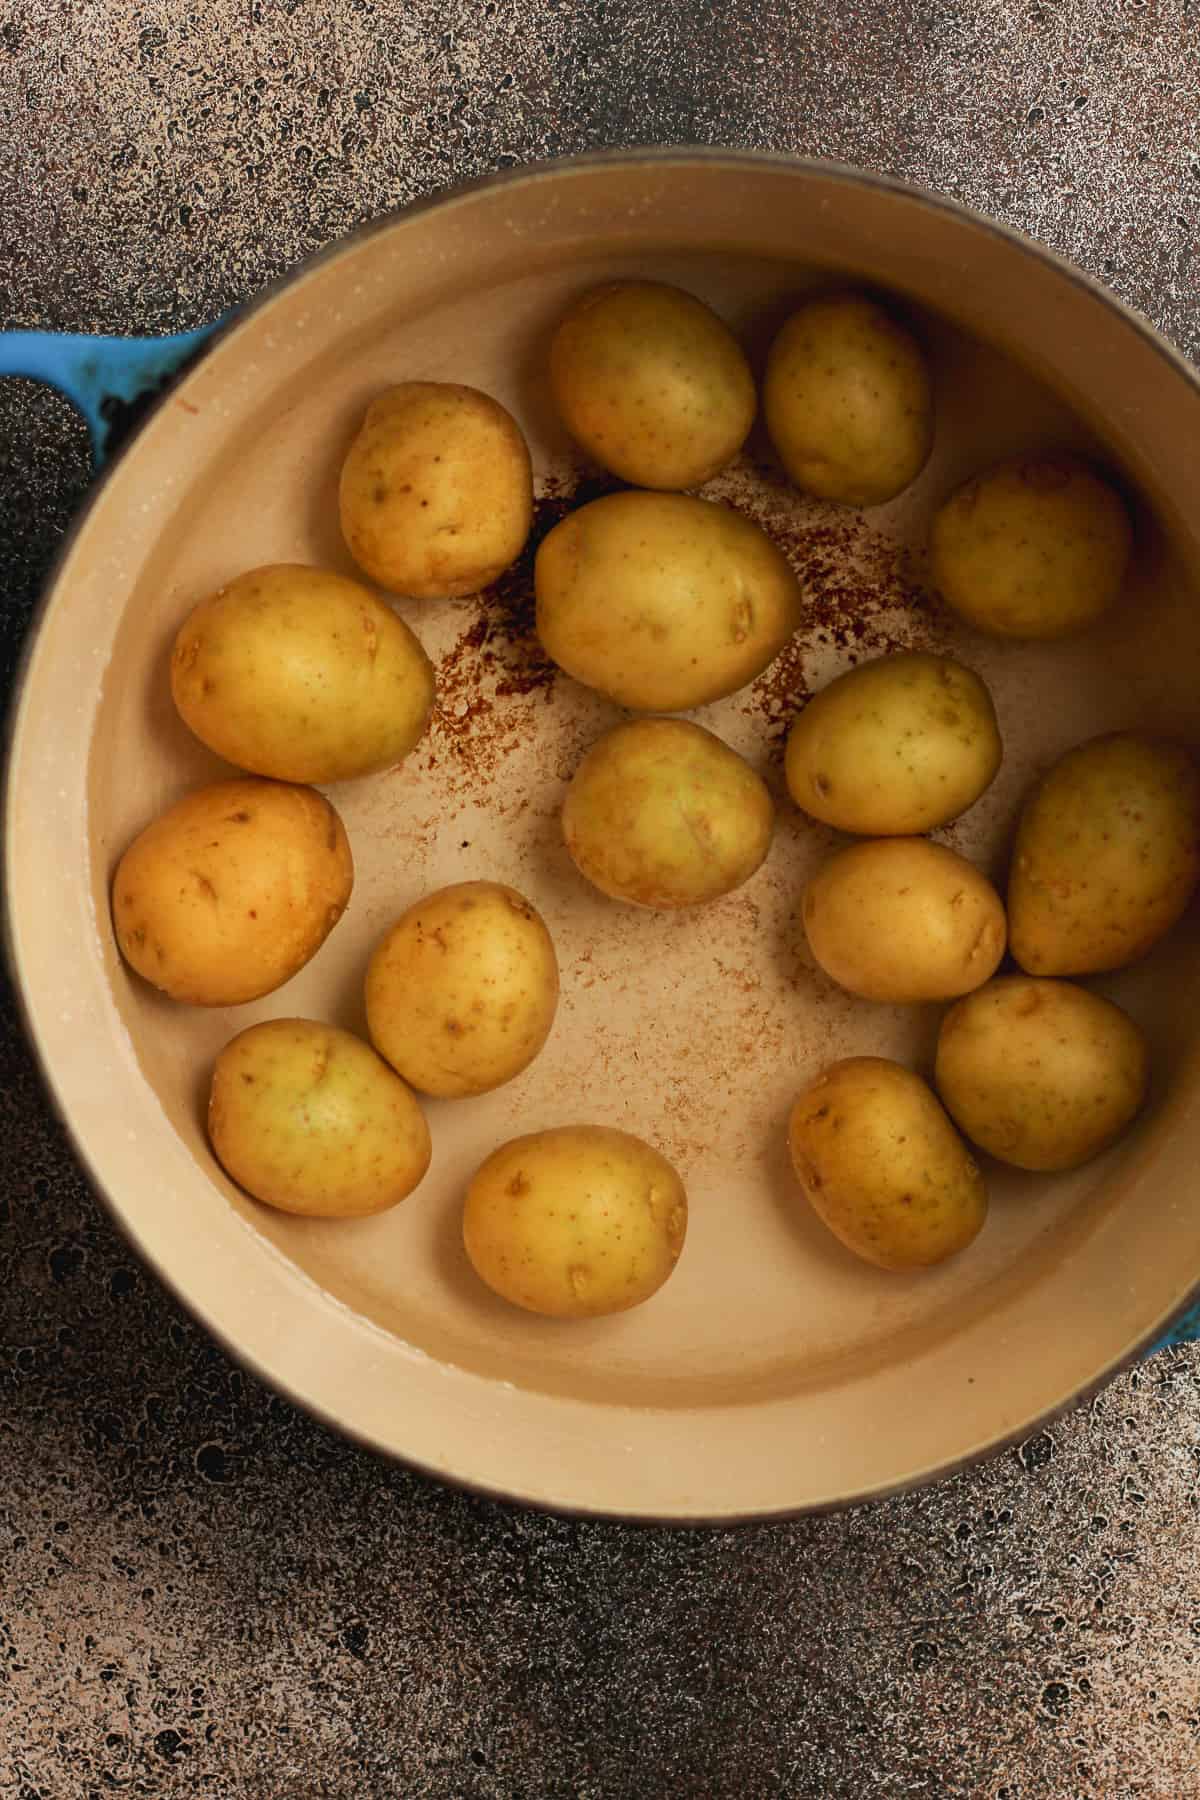 The pot of baby potatoes filled with water.